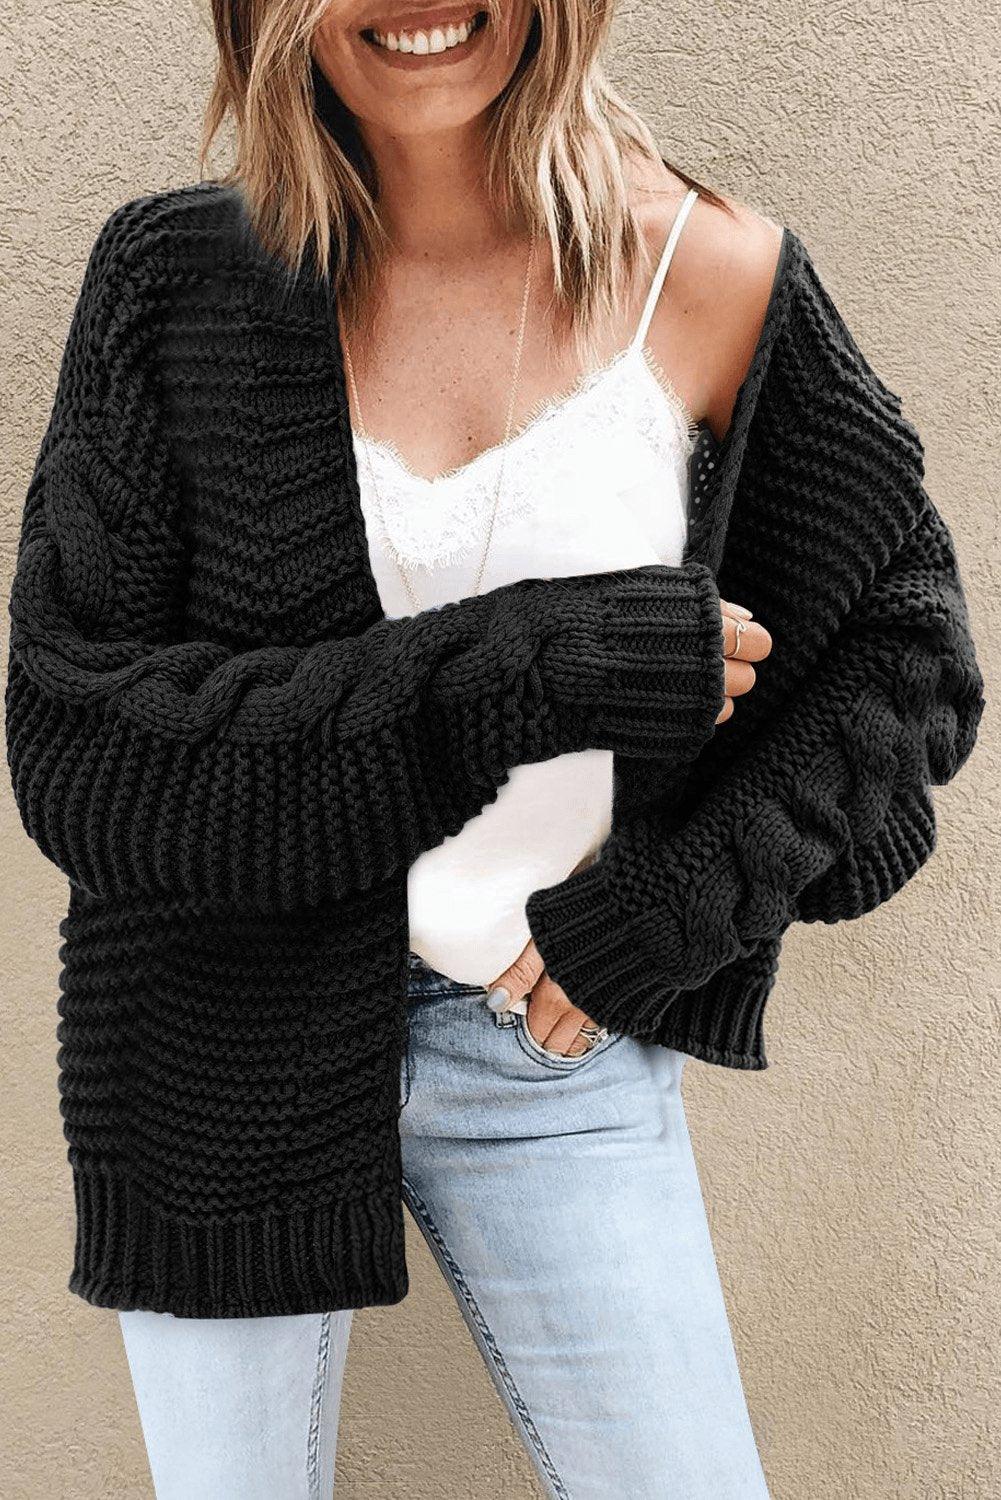 Black Open Front Chunky Knit Cardigan